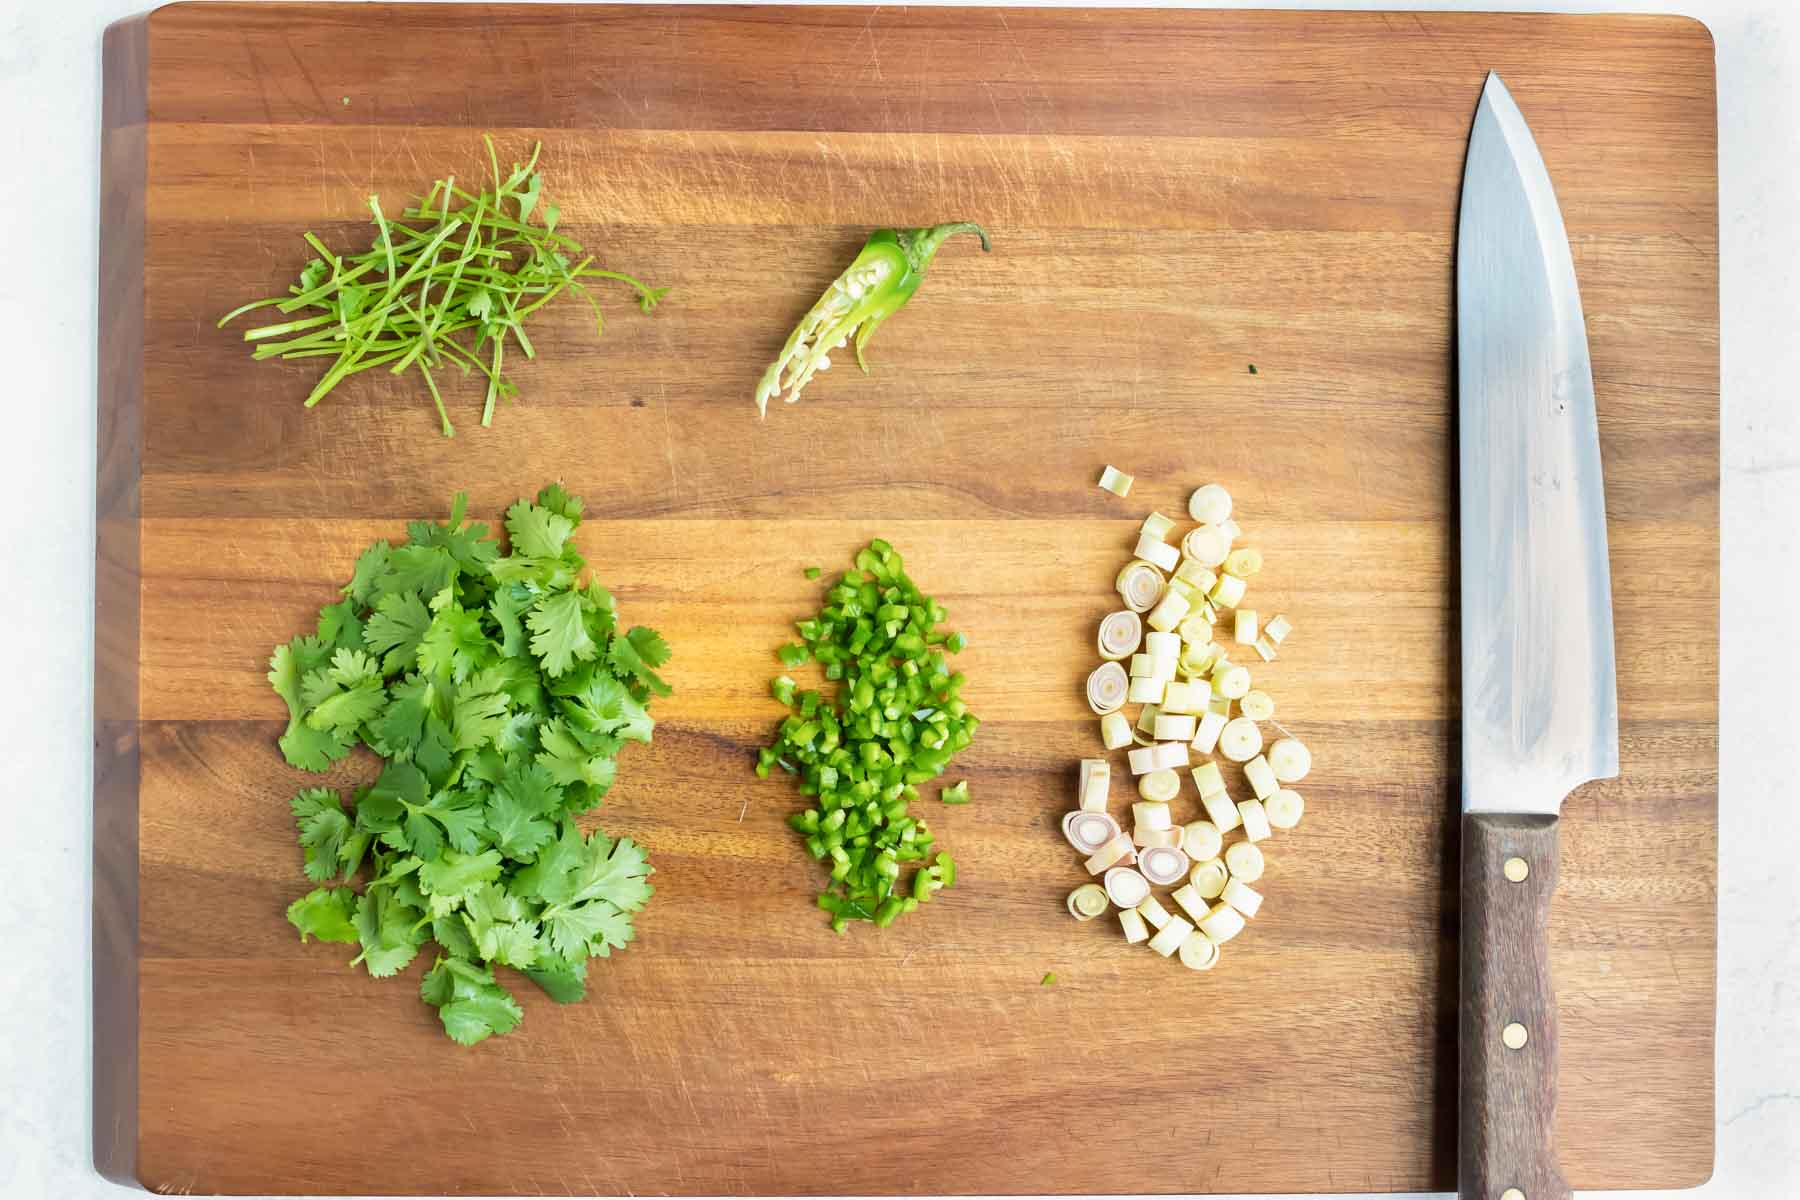 Garlic, cilantro, and peppers are chopped and prepared on a cutting board.